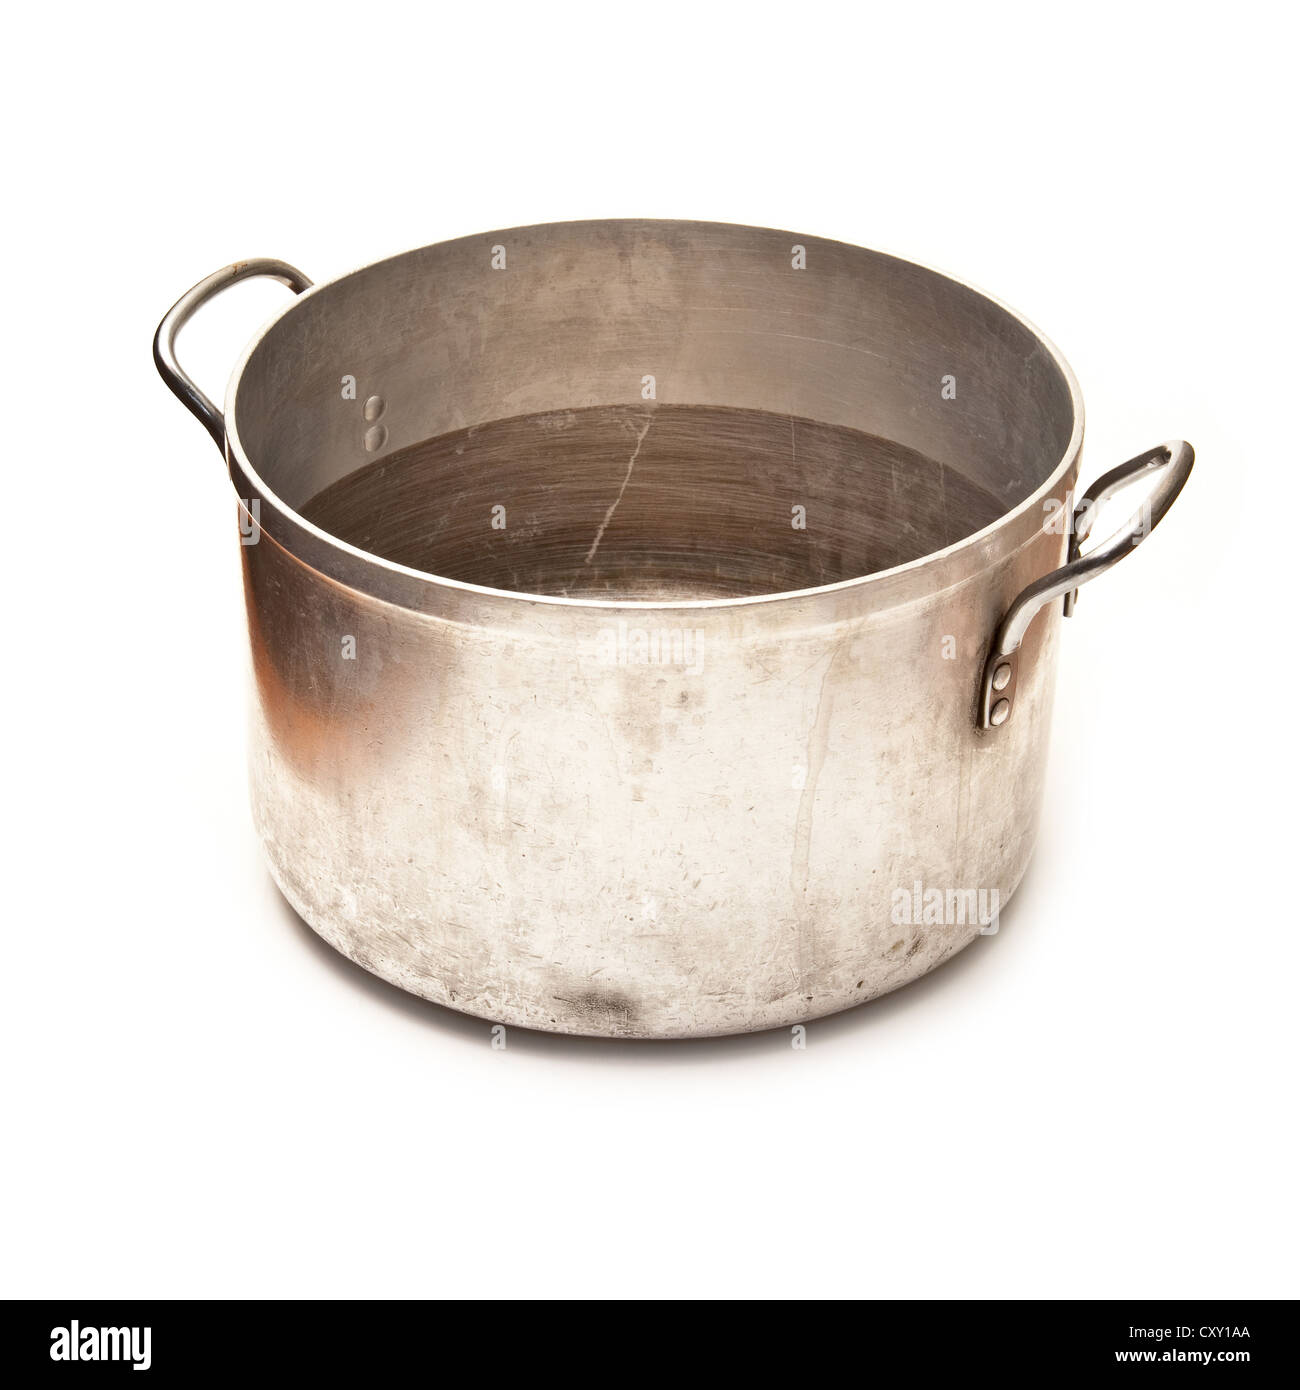 https://c8.alamy.com/comp/CXY1AA/large-metal-saucepan-cooking-pot-isolated-on-a-white-studio-background-CXY1AA.jpg